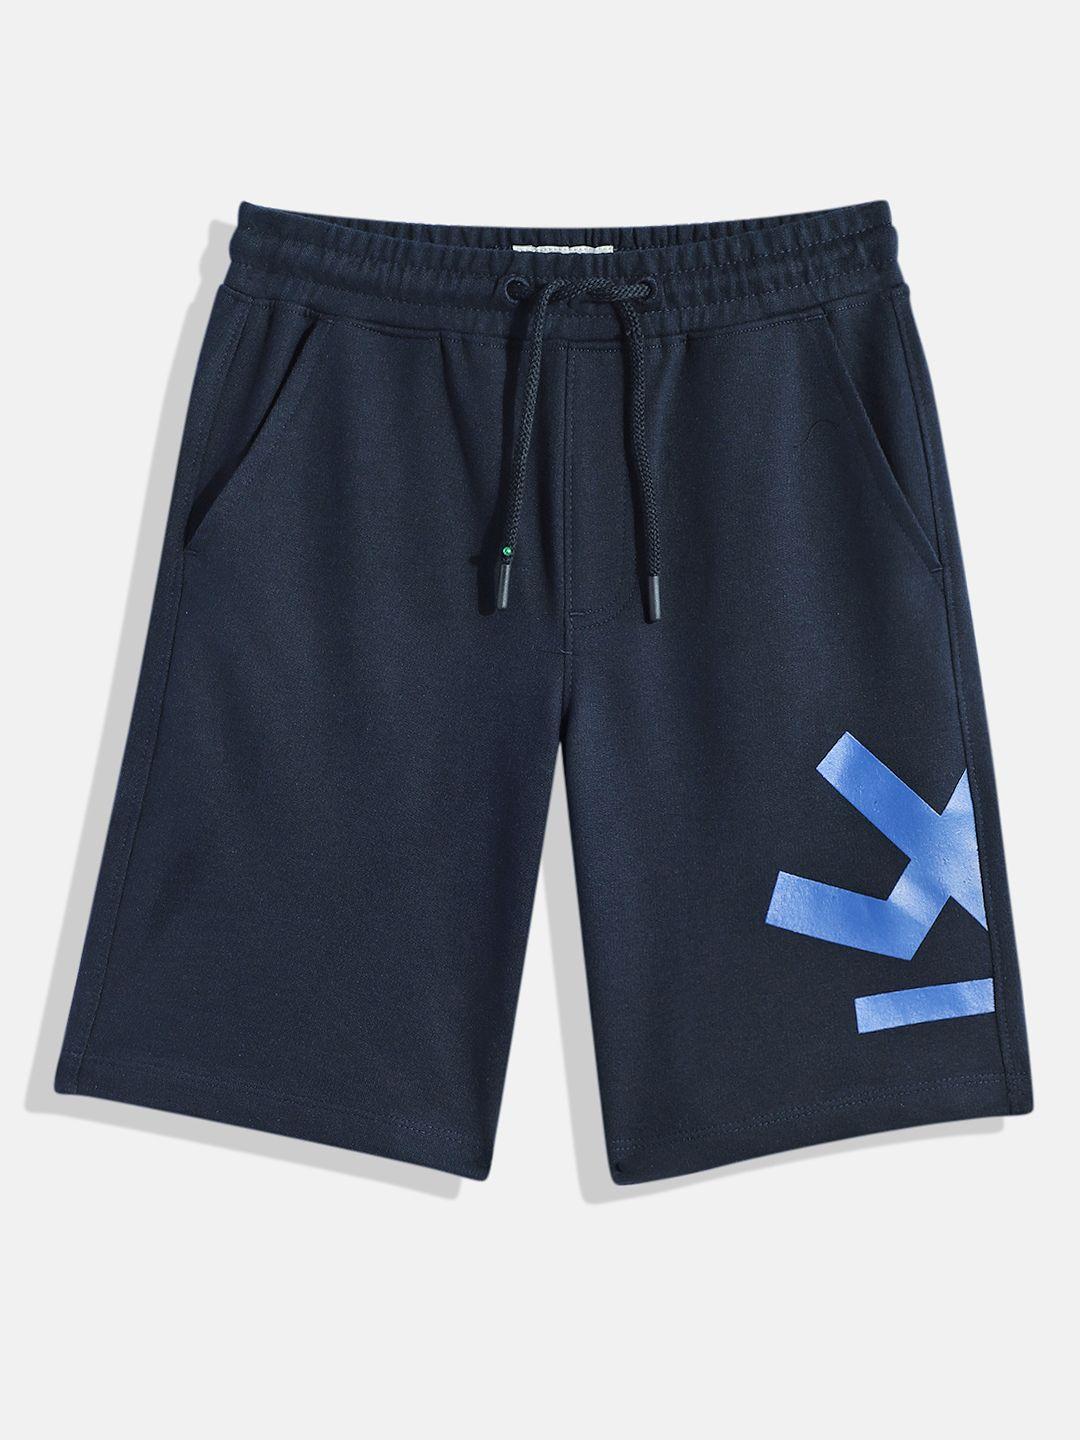 wrogn youth boys navy blue solid regular fit mid-rise shorts with brand logo print detail